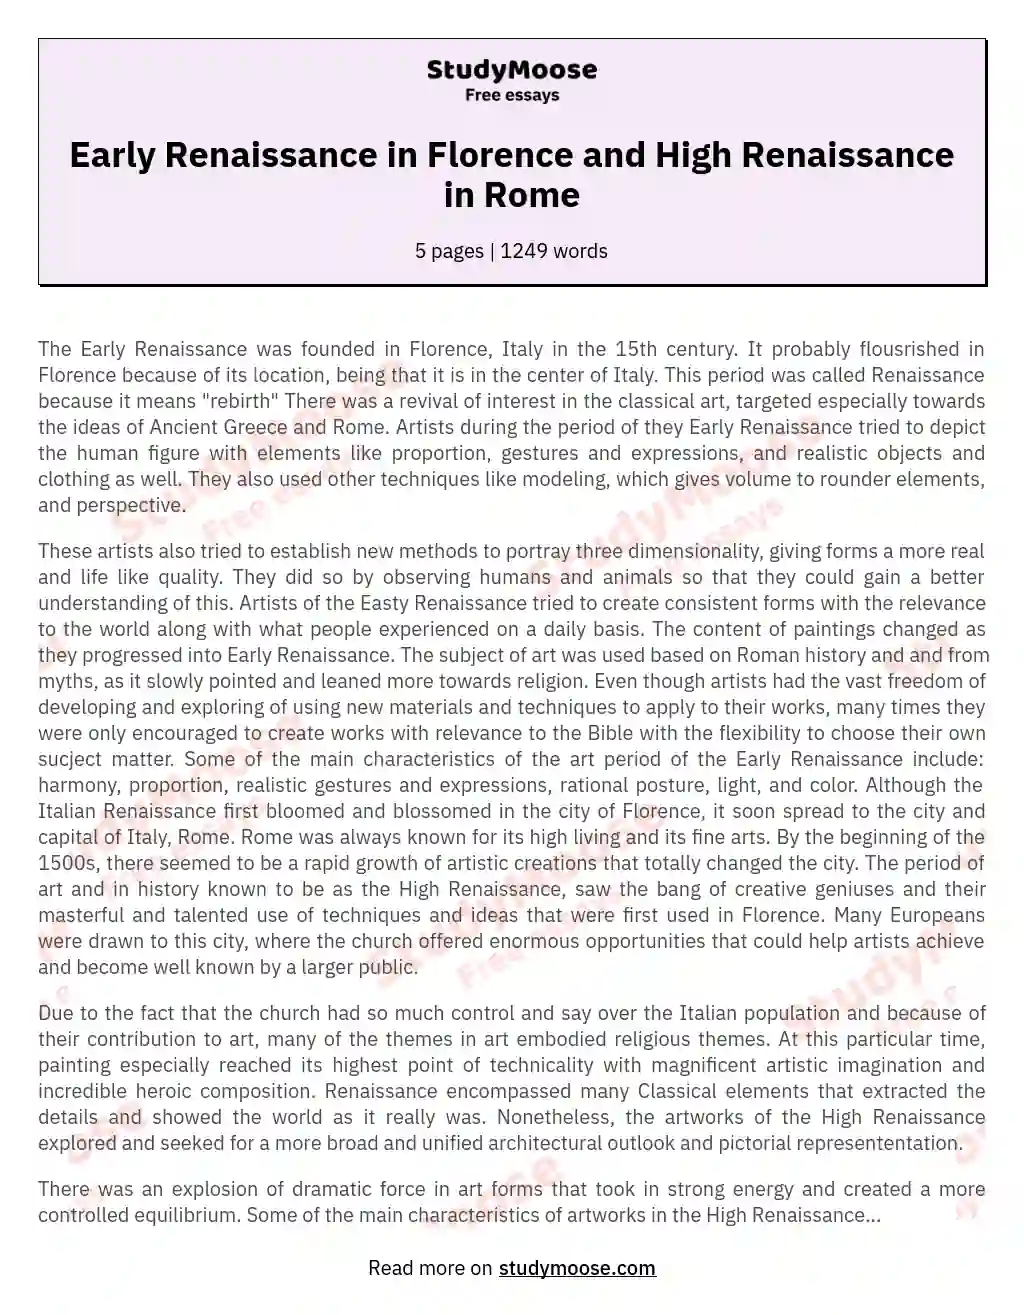 Early Renaissance in Florence and High Renaissance in Rome essay